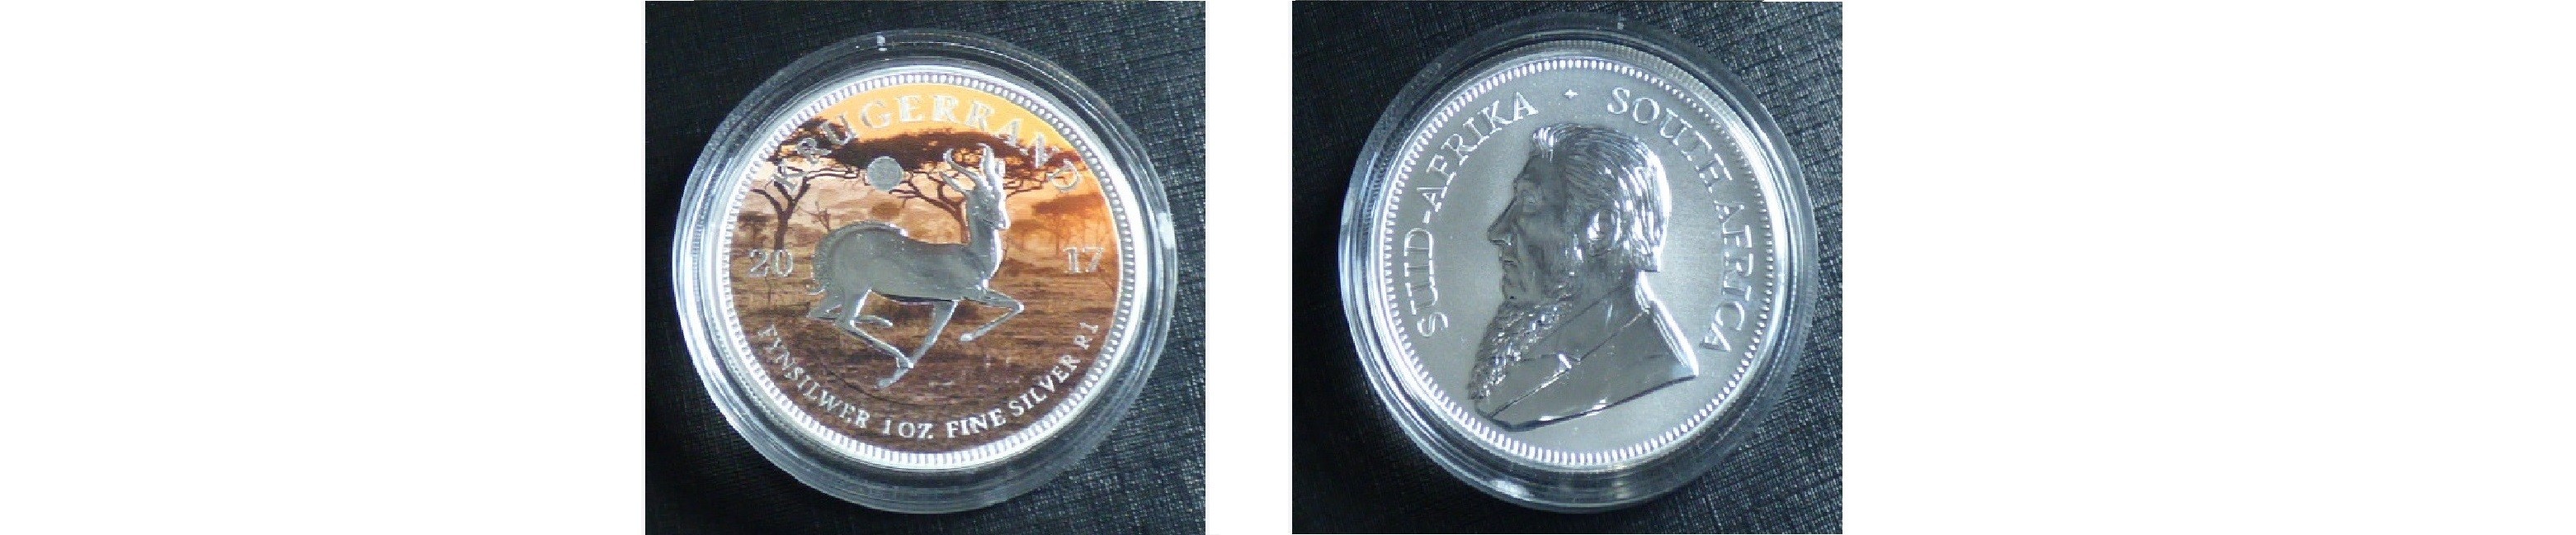 Krugerrand 2017 "50 years" colored